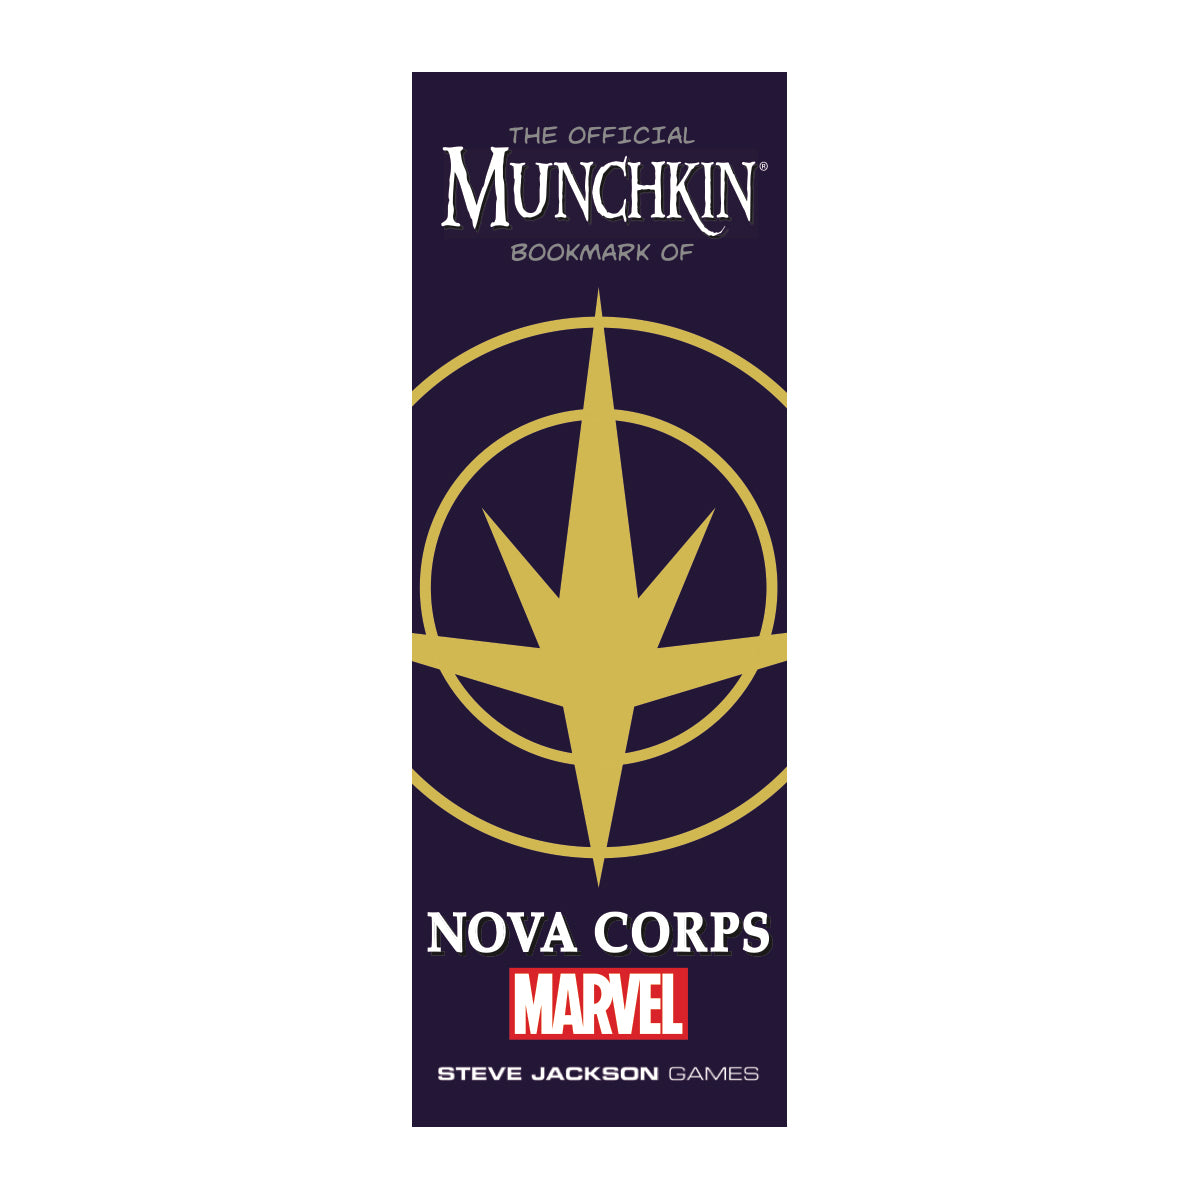 The Official Munchkin Bookmark of Nova Corps